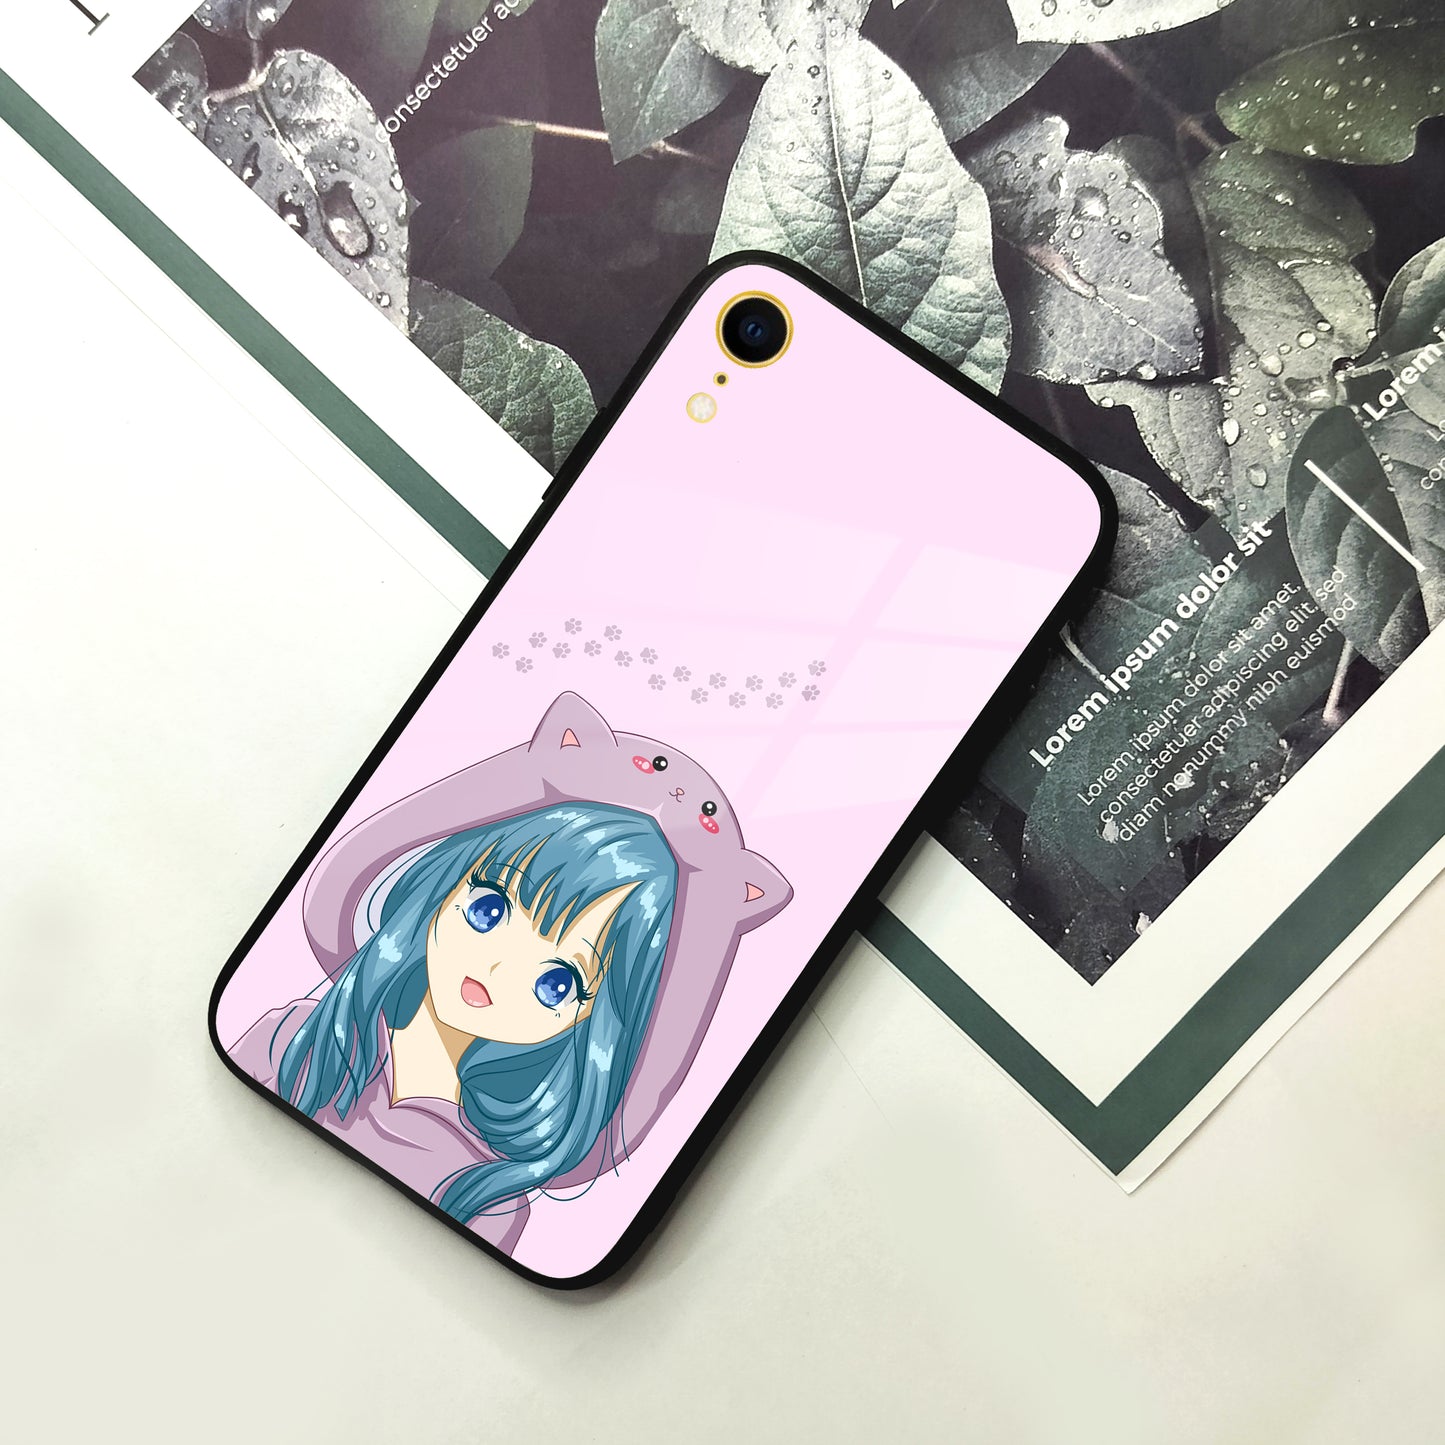 Purple Aesthetic Girl With Cat Phone Glass Case Cover For iPhone